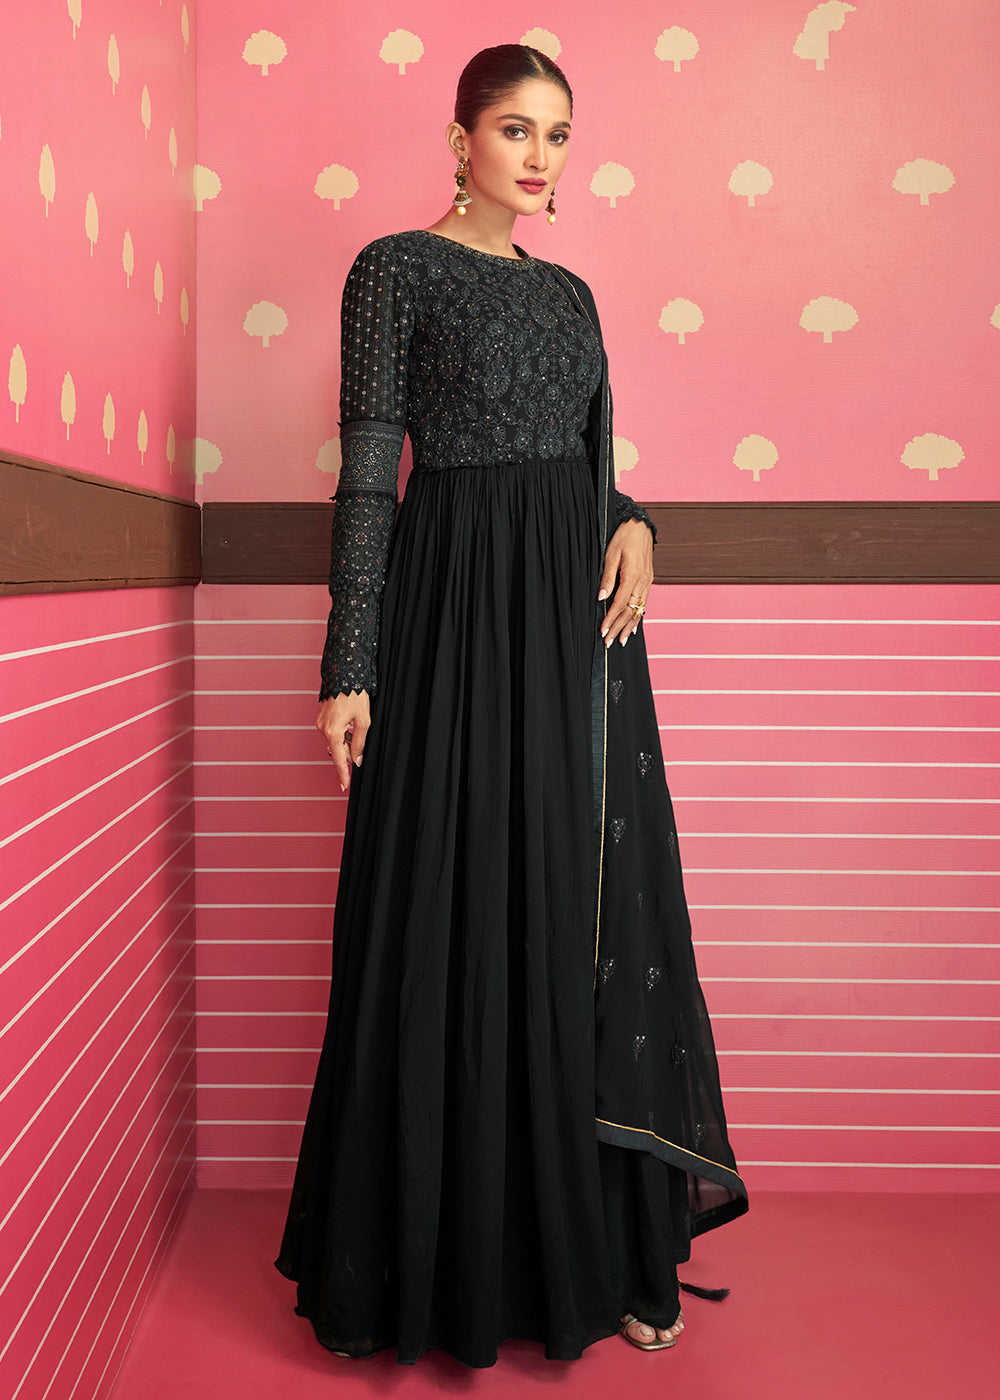 Buy Now Classy Midnight Black Embroidered Long Palazzo Salwar Suit Online in USA, UK, Canada, Germany & Worldwide at Empress Clothing.